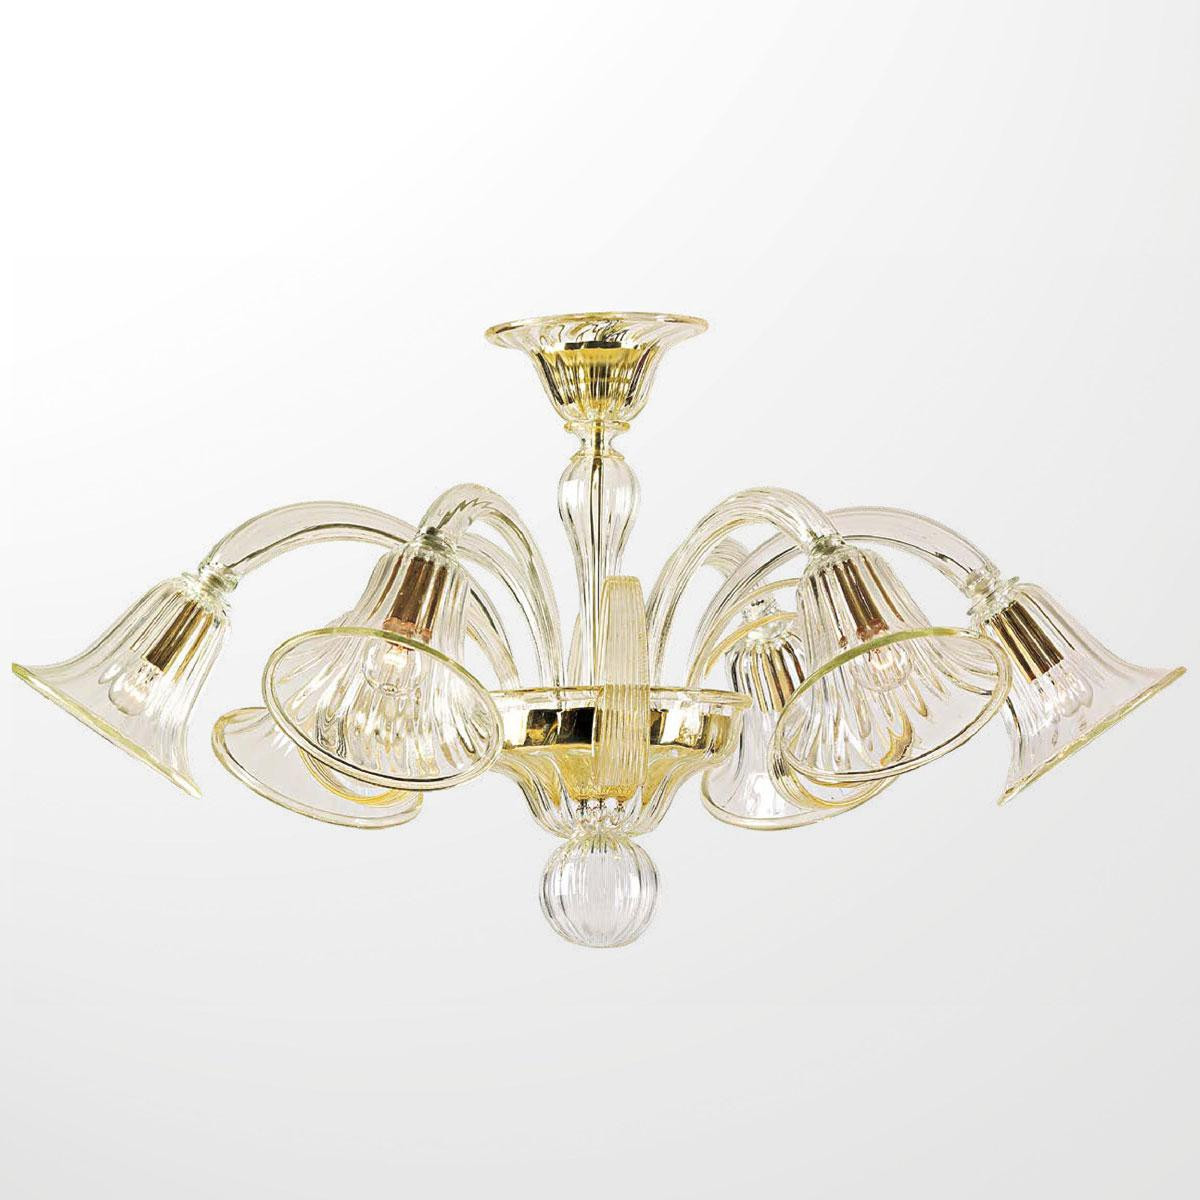 "Alene" Murano glass chandelier - 6 lights - transparent and gold